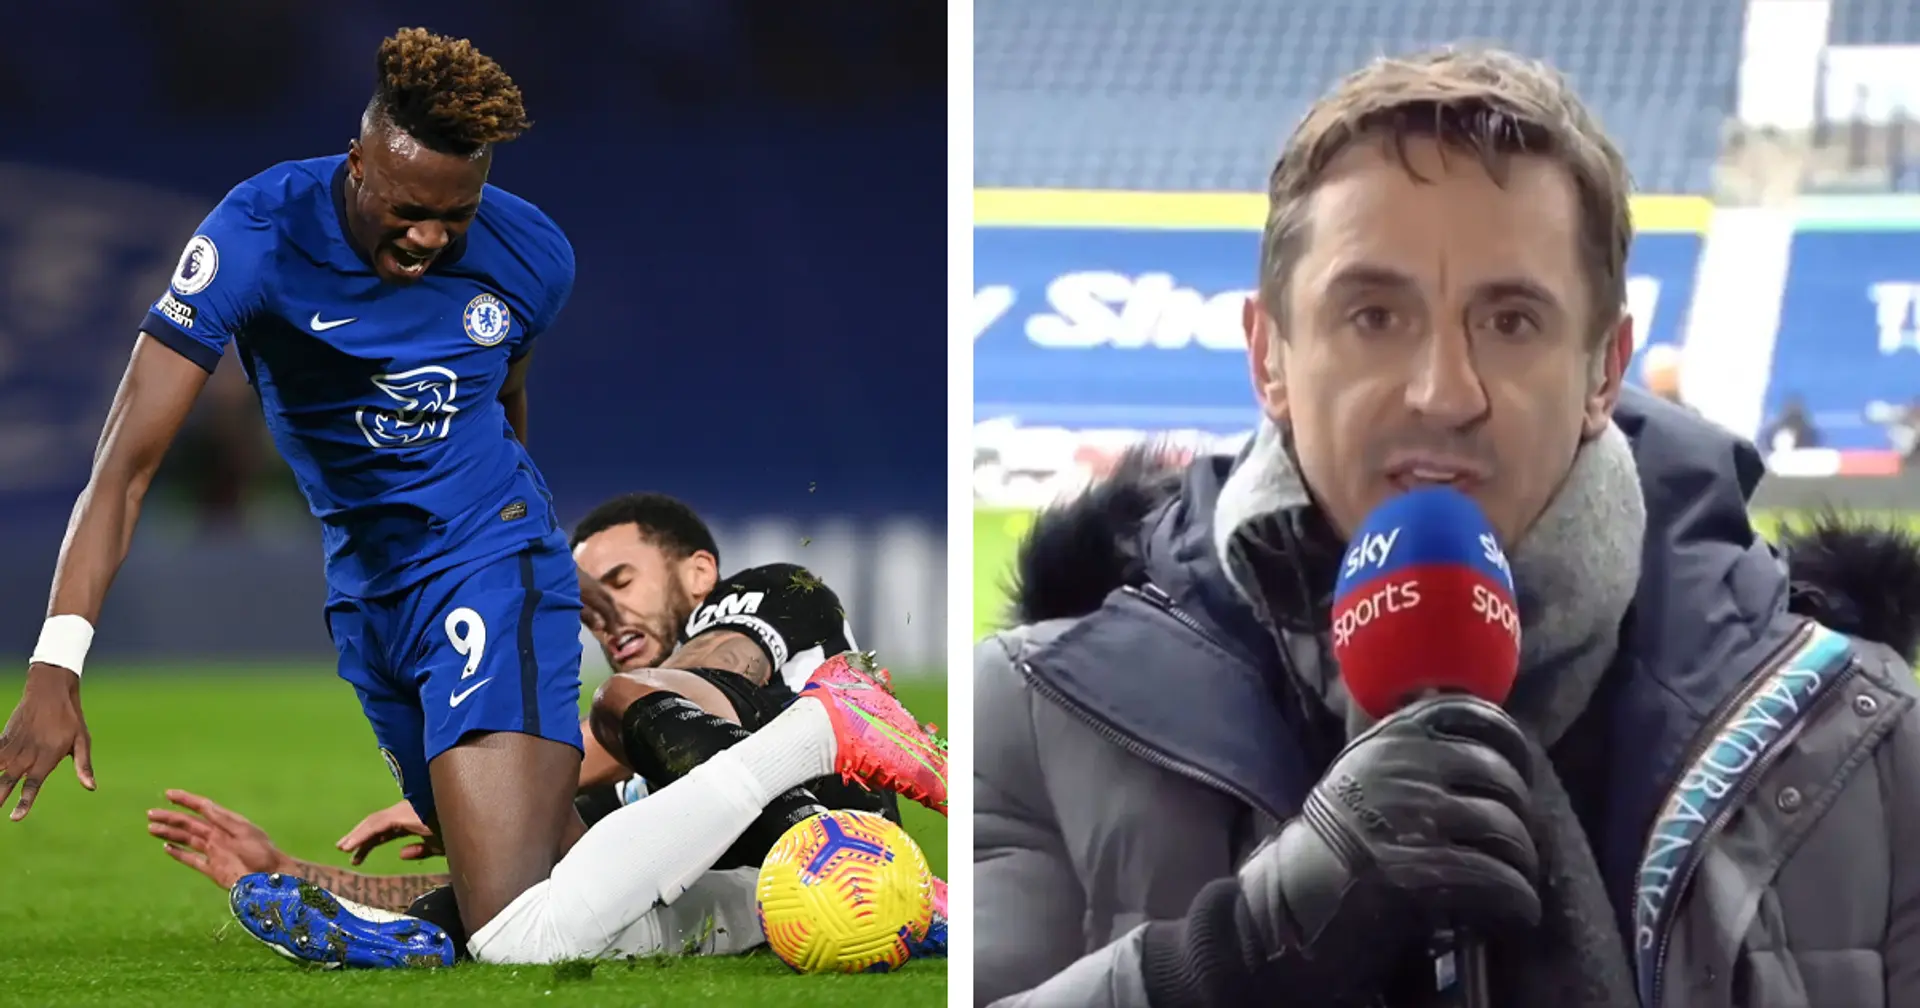 Gary Neville slams Tammy Abraham for trying to draw penalty and causing his own injury